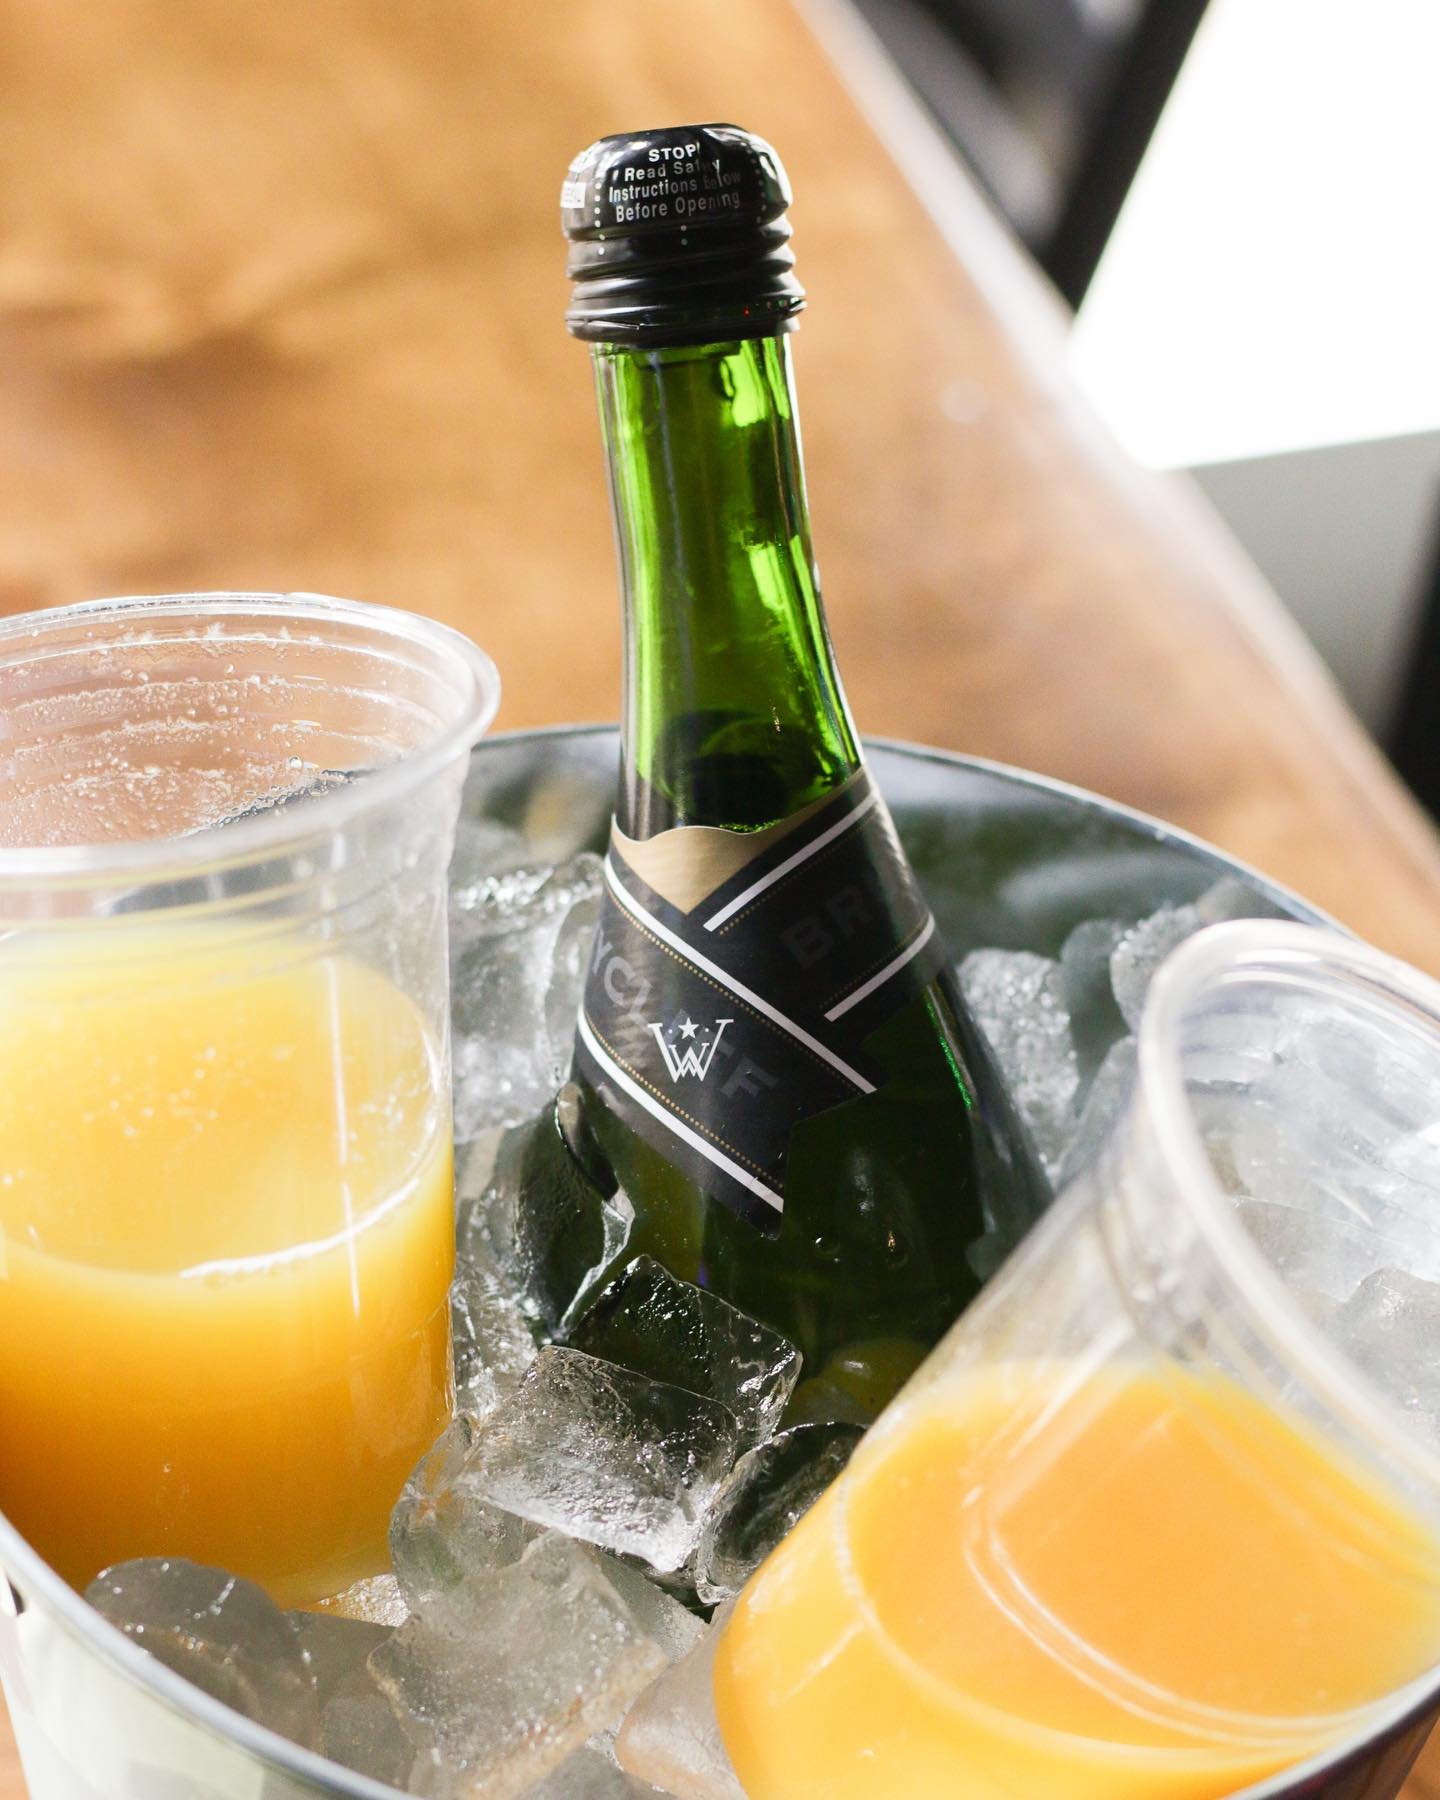 Brunch just got a whole lot better with $15 bottomless mimosas at Dawg House!